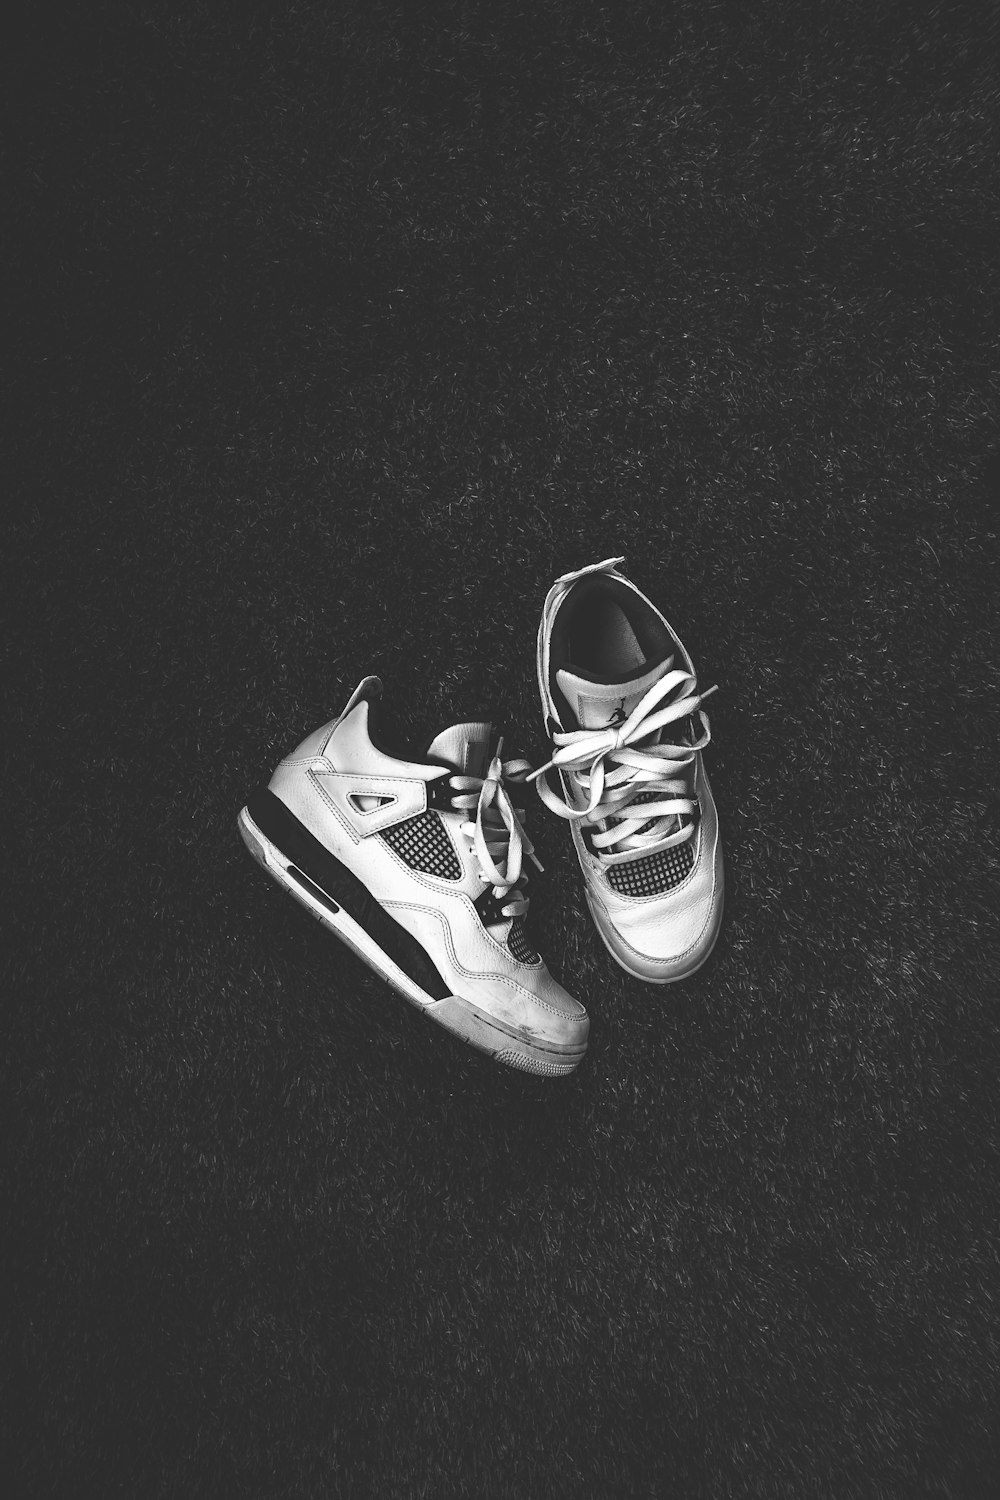 Black and white adidas sneakers photo – Free Sneaker Image on Unsplash